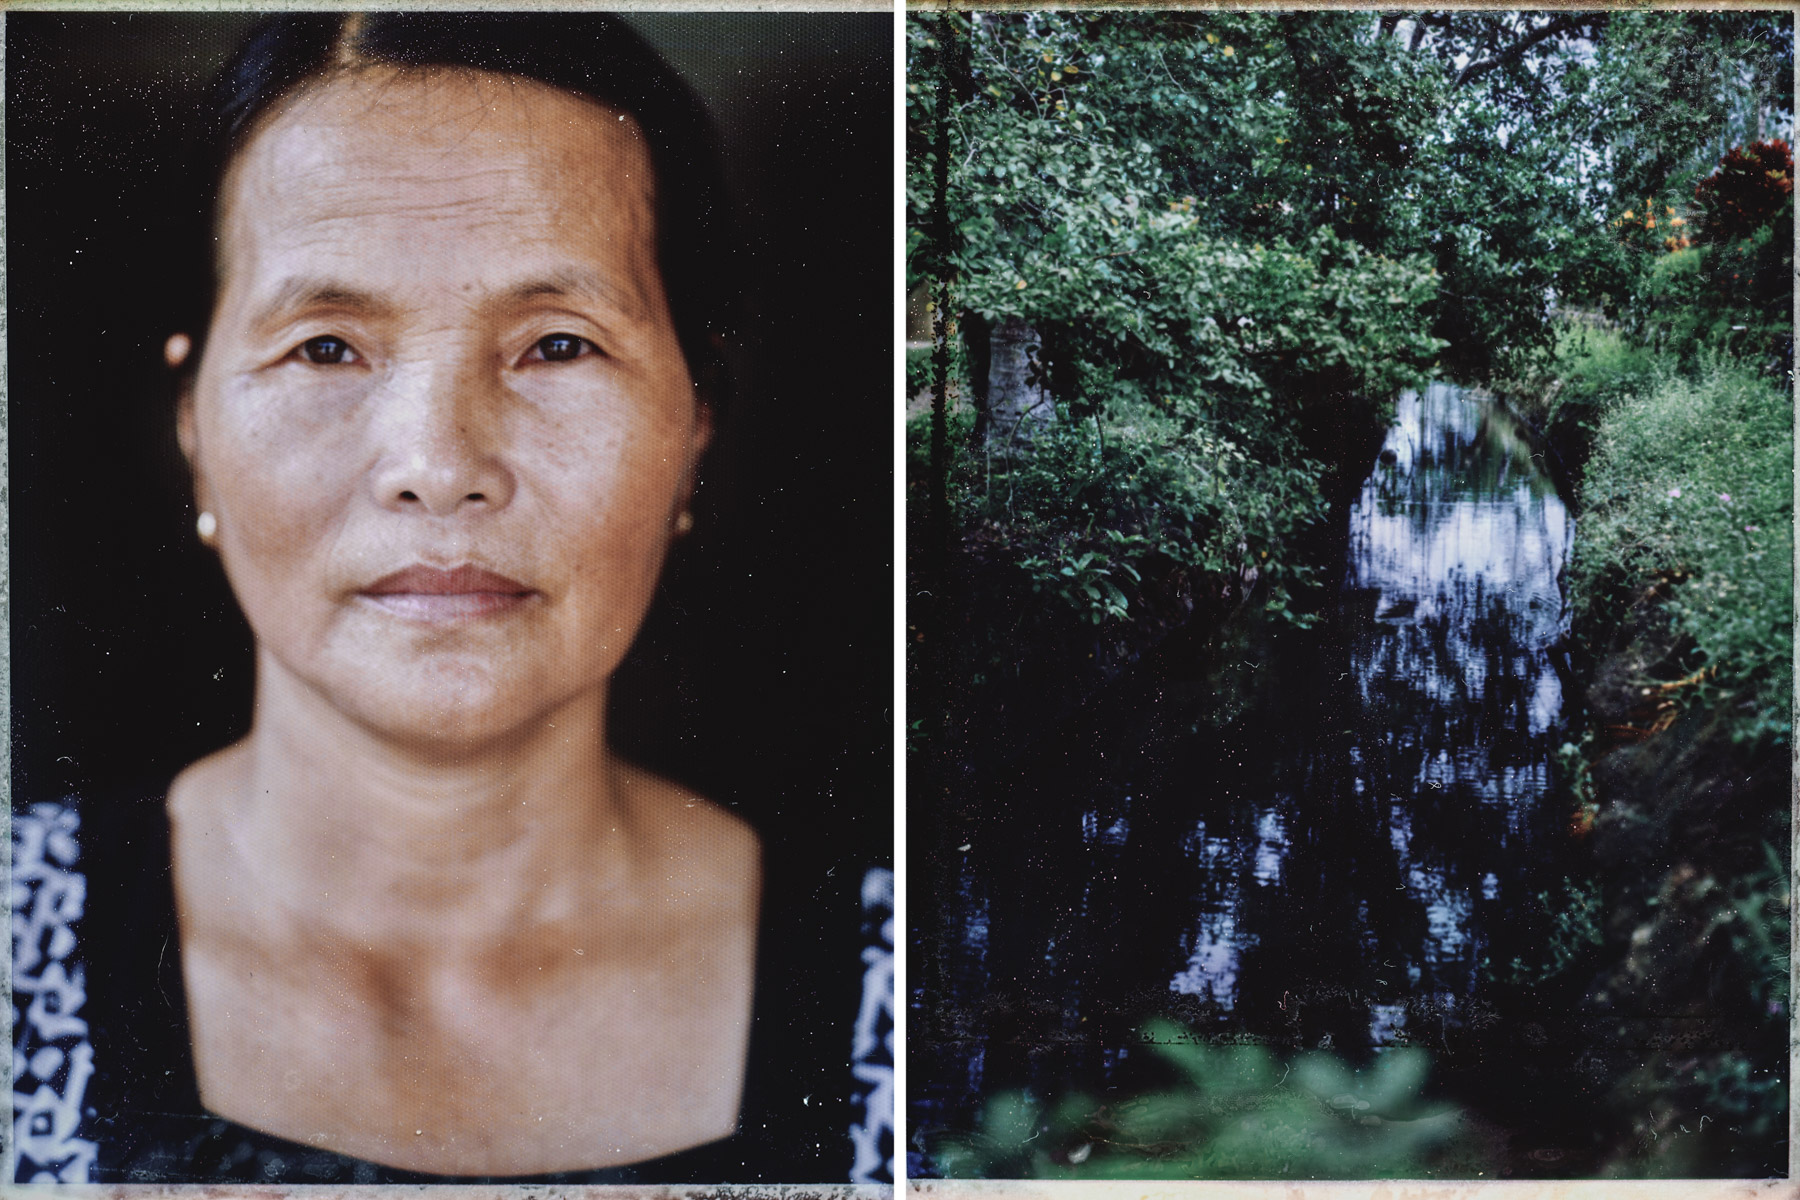 A portrait of Nguyen Thi Lien, who survived the My Lai Massacre during the American-Vietnam War, and a small ditch and stream where hundreds of bodies were systematically slaughtered by US troops on 16 March 1968.